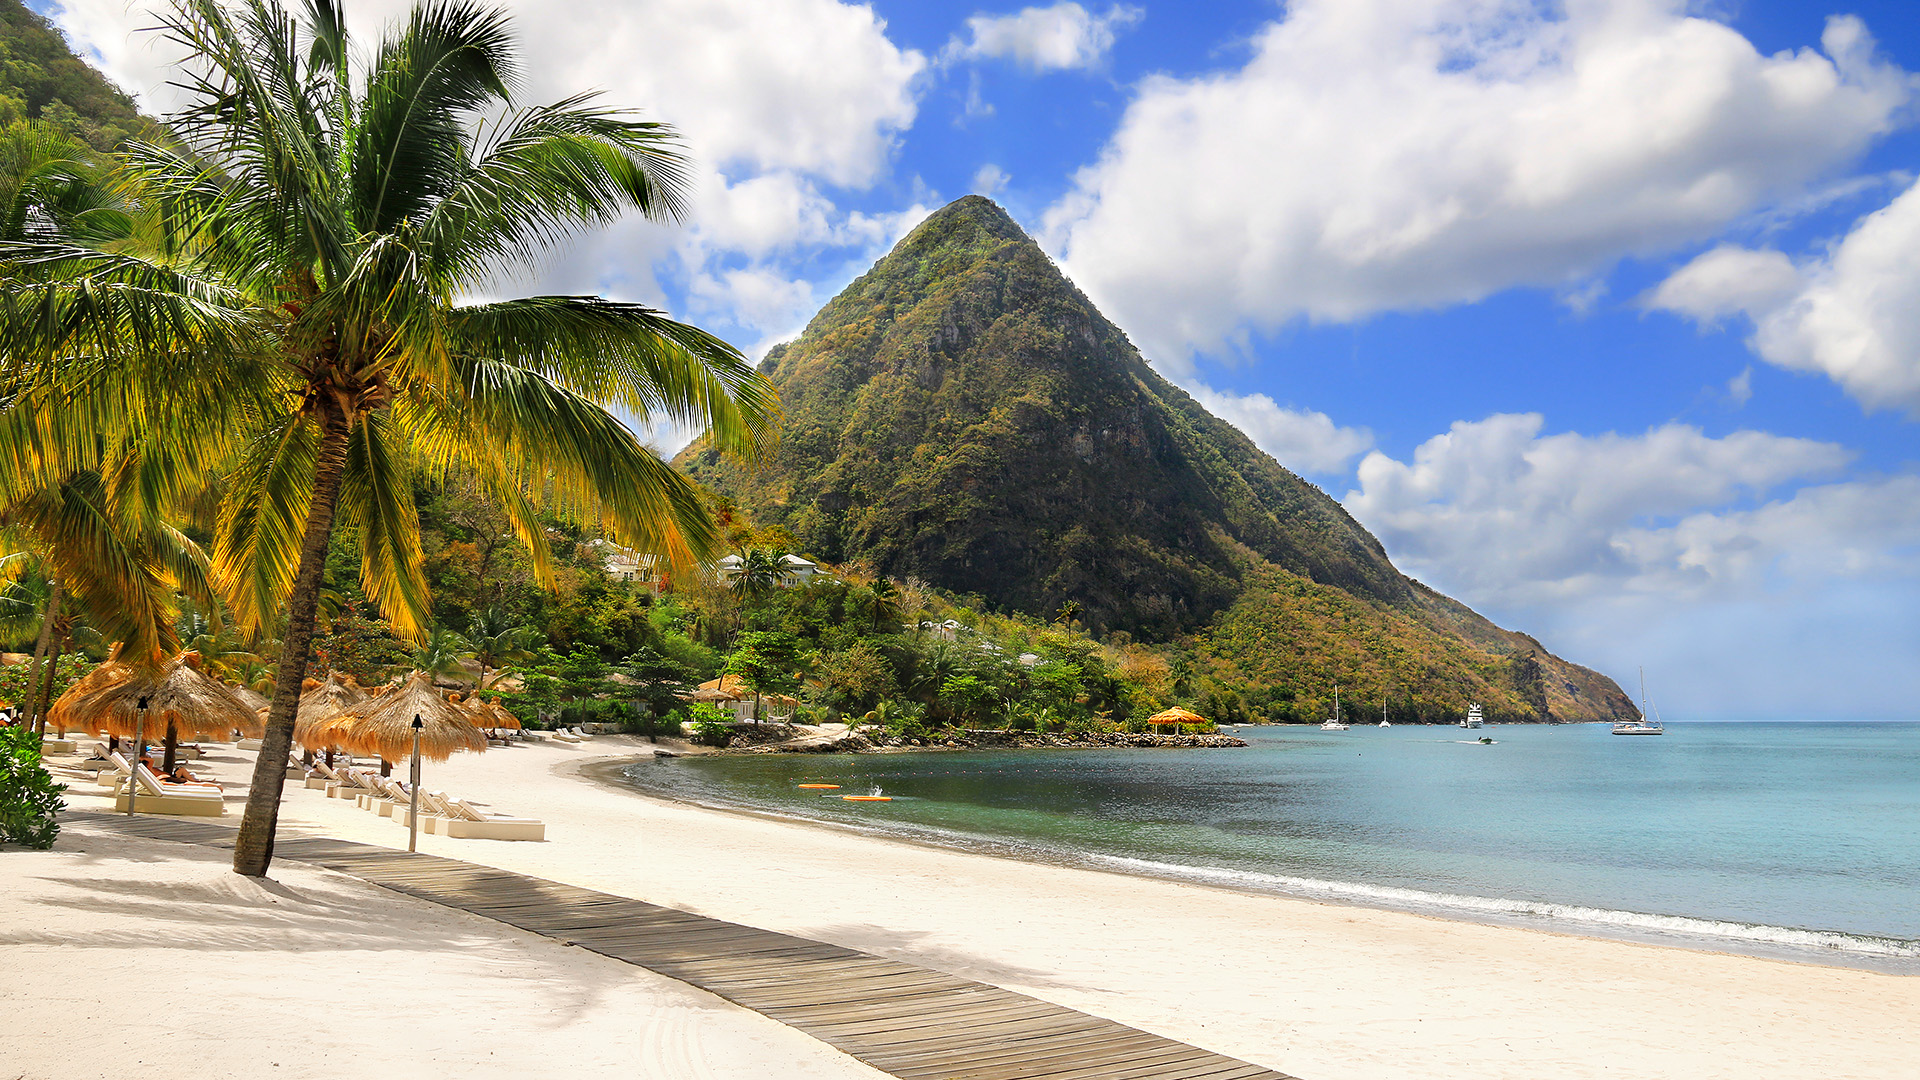 The Best Caribbean Islands for Beach Vacations